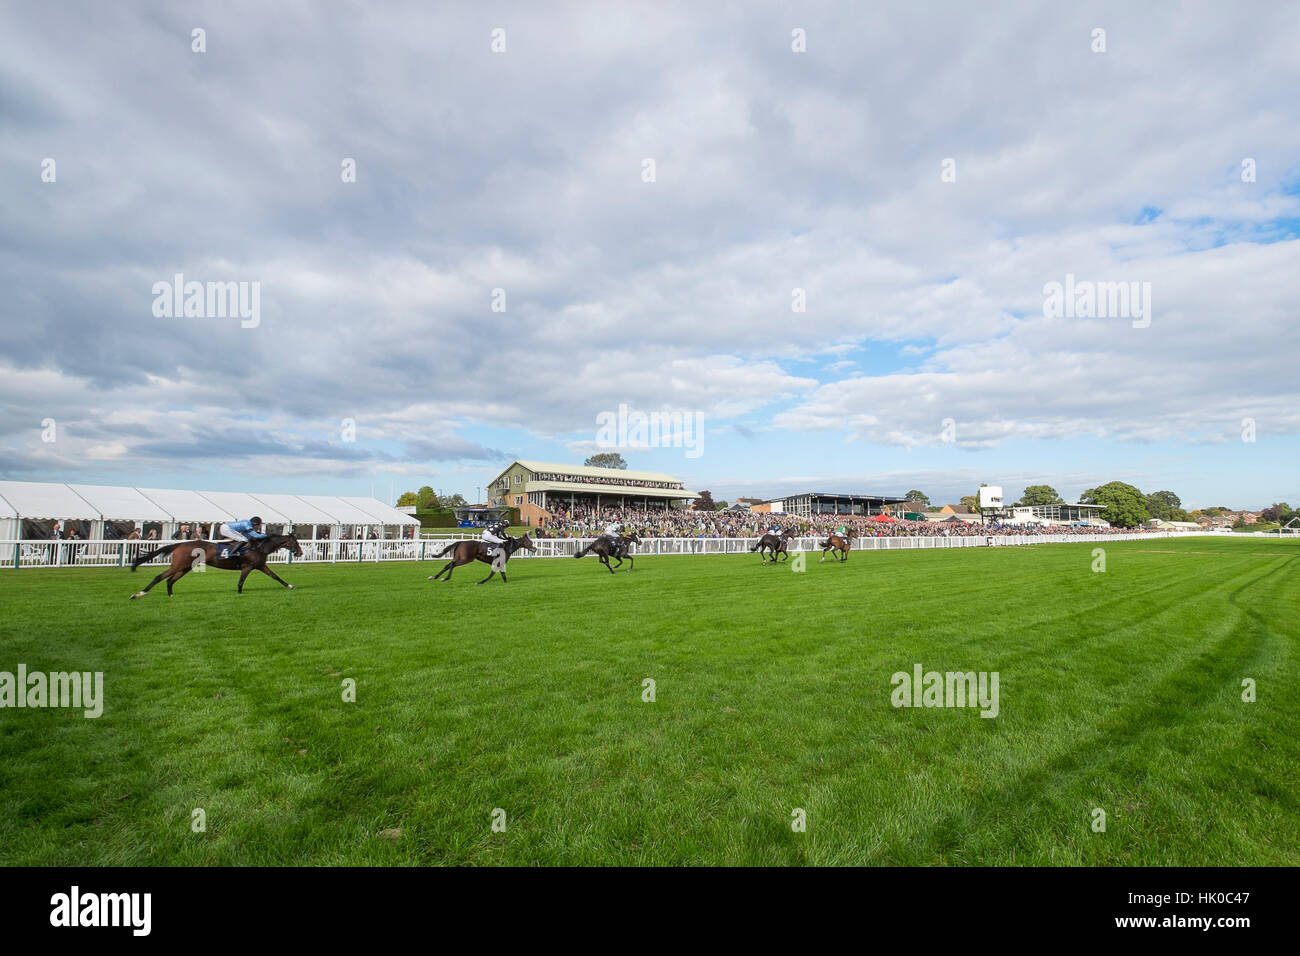 Horse racing at Hereford racecourse - wide angle Stock Photo